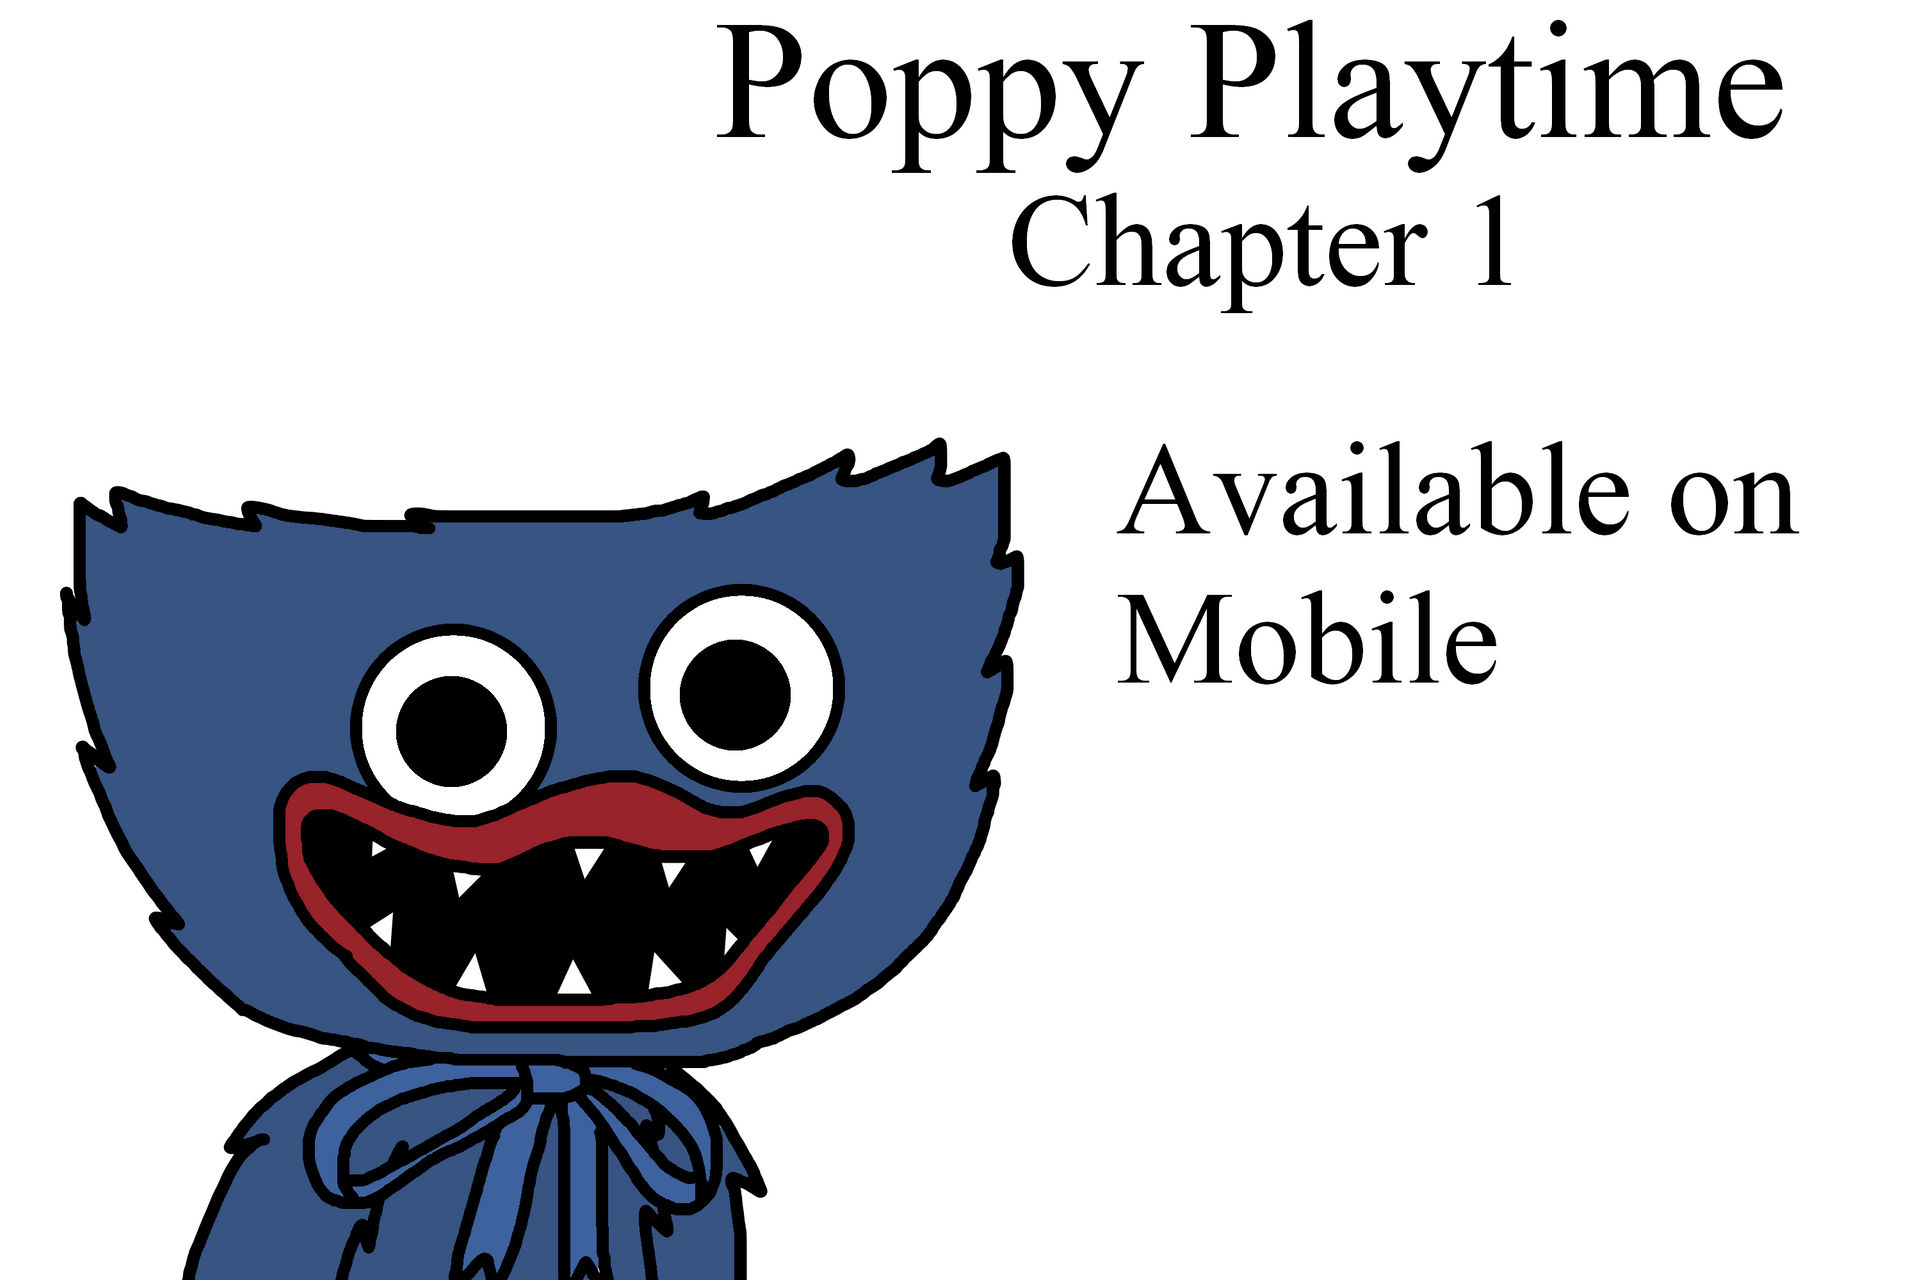 Poppy Playtime Chapter 1 by Thuy Tran Thi